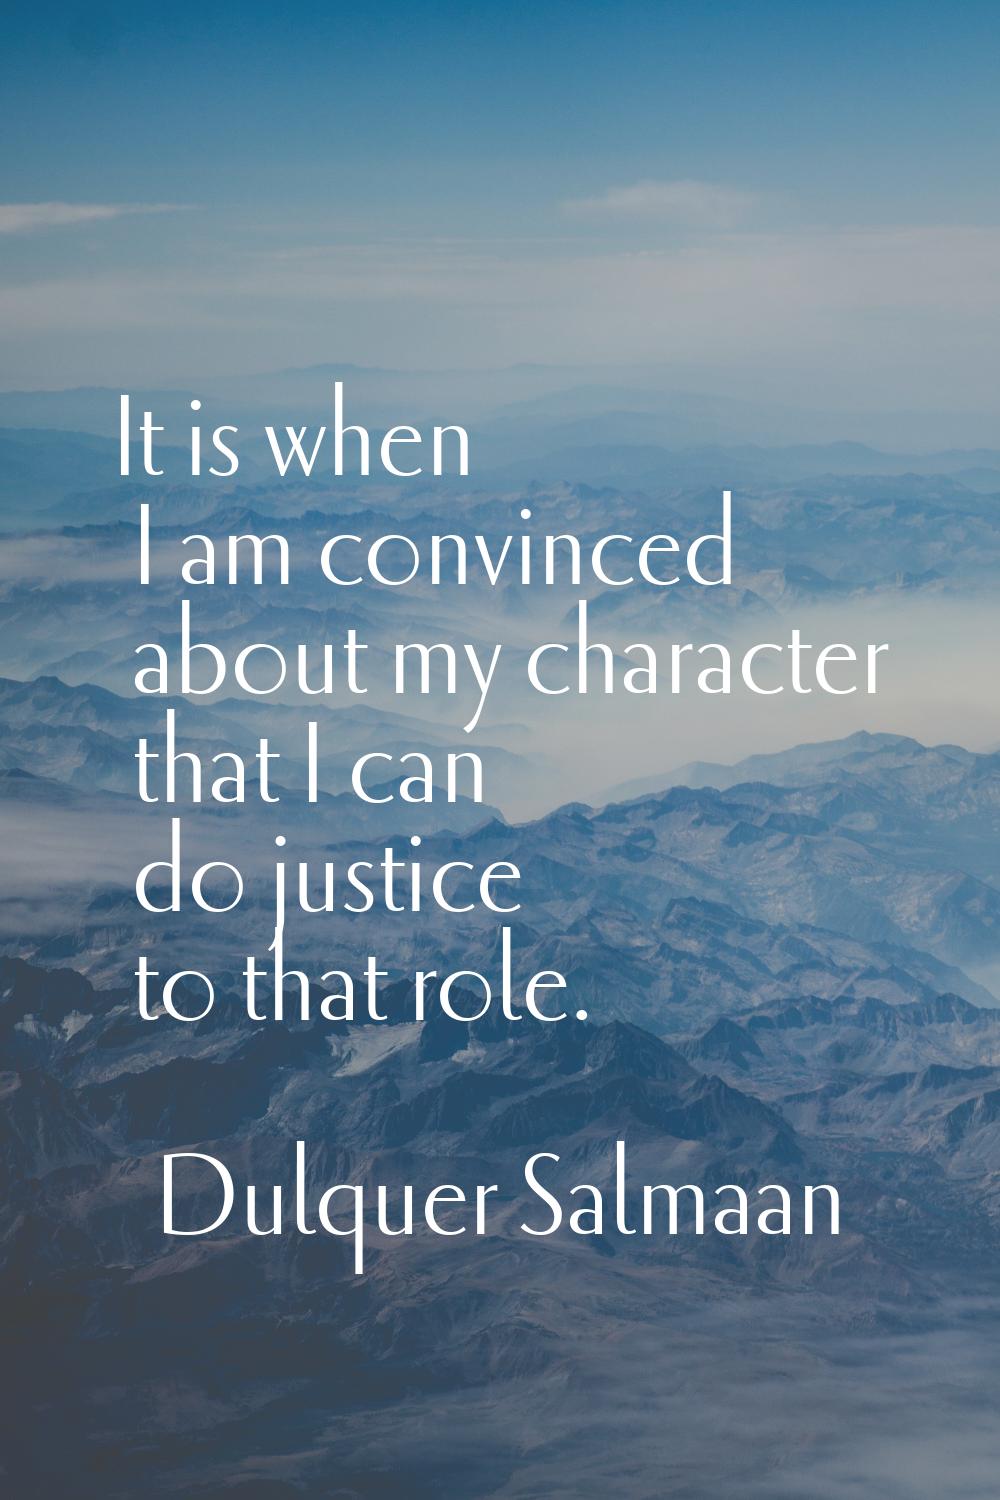 It is when I am convinced about my character that I can do justice to that role.